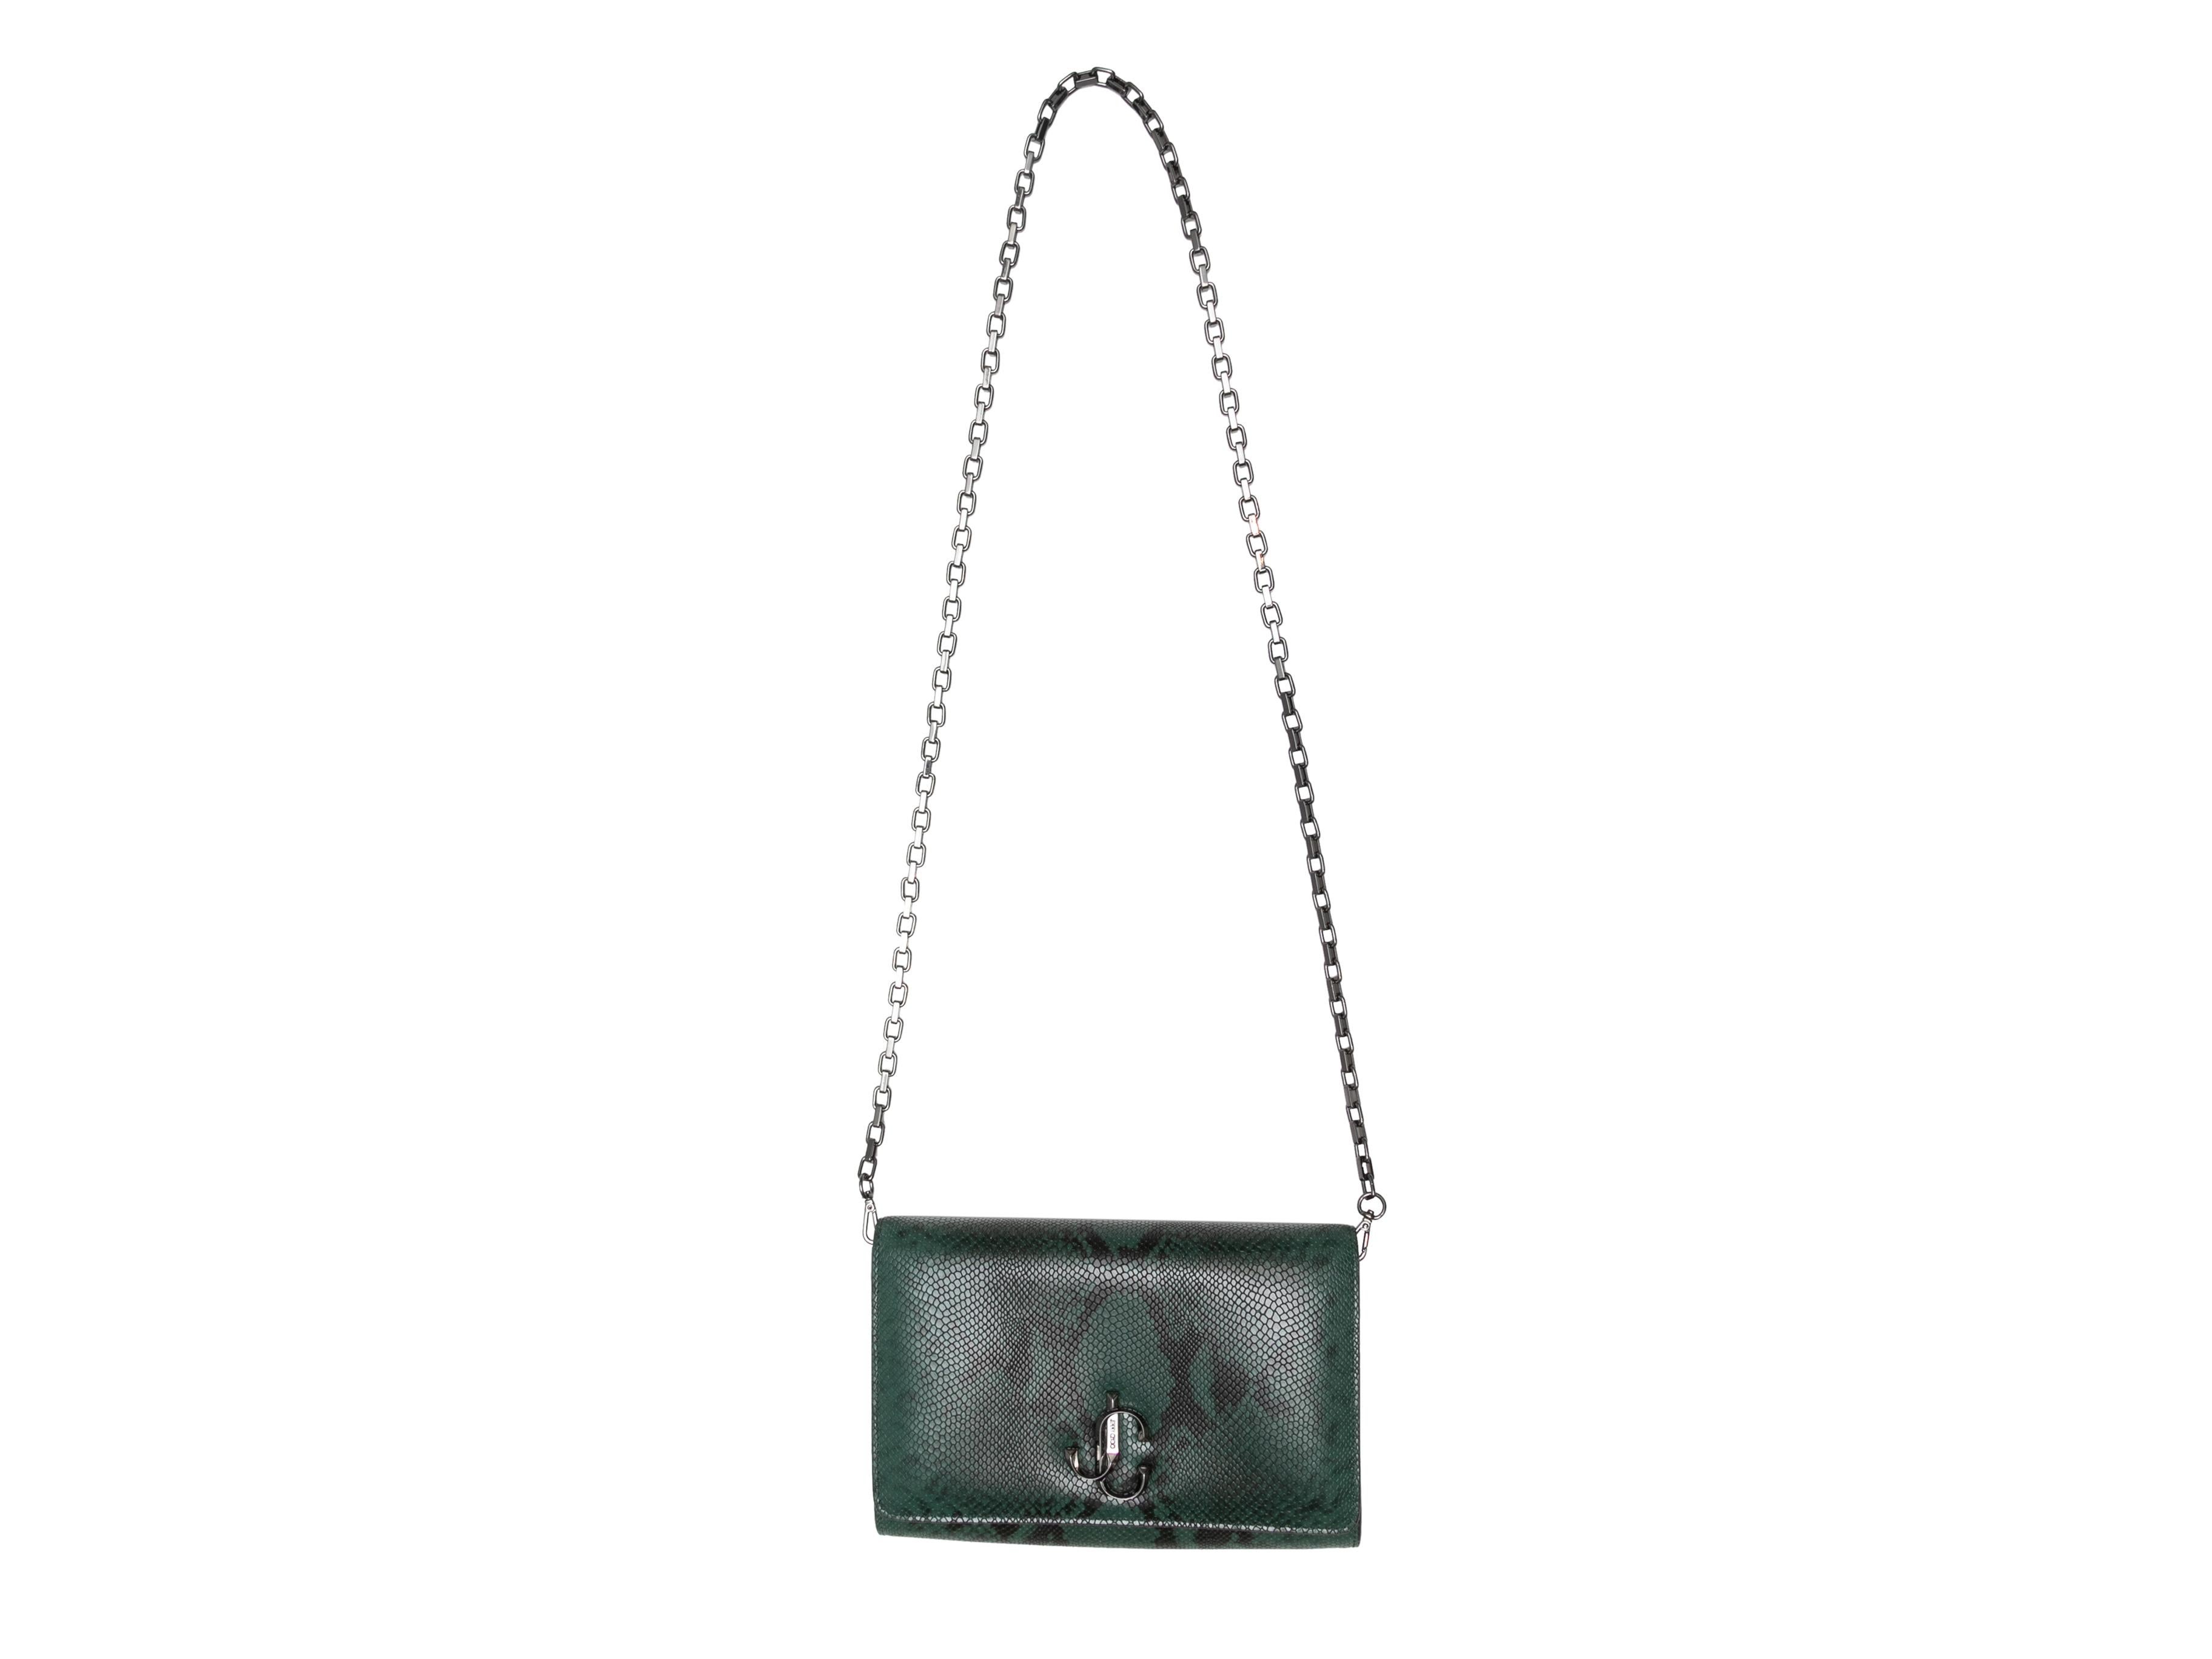 Dark Green & Black Jimmy Choo Embossed Leather Shoulder Bag. This shoulder bag features an embossed leather faux snakeskin body, gunmetal hardware, a single chain-link shoulder strap, and a front flap closure. 8.25